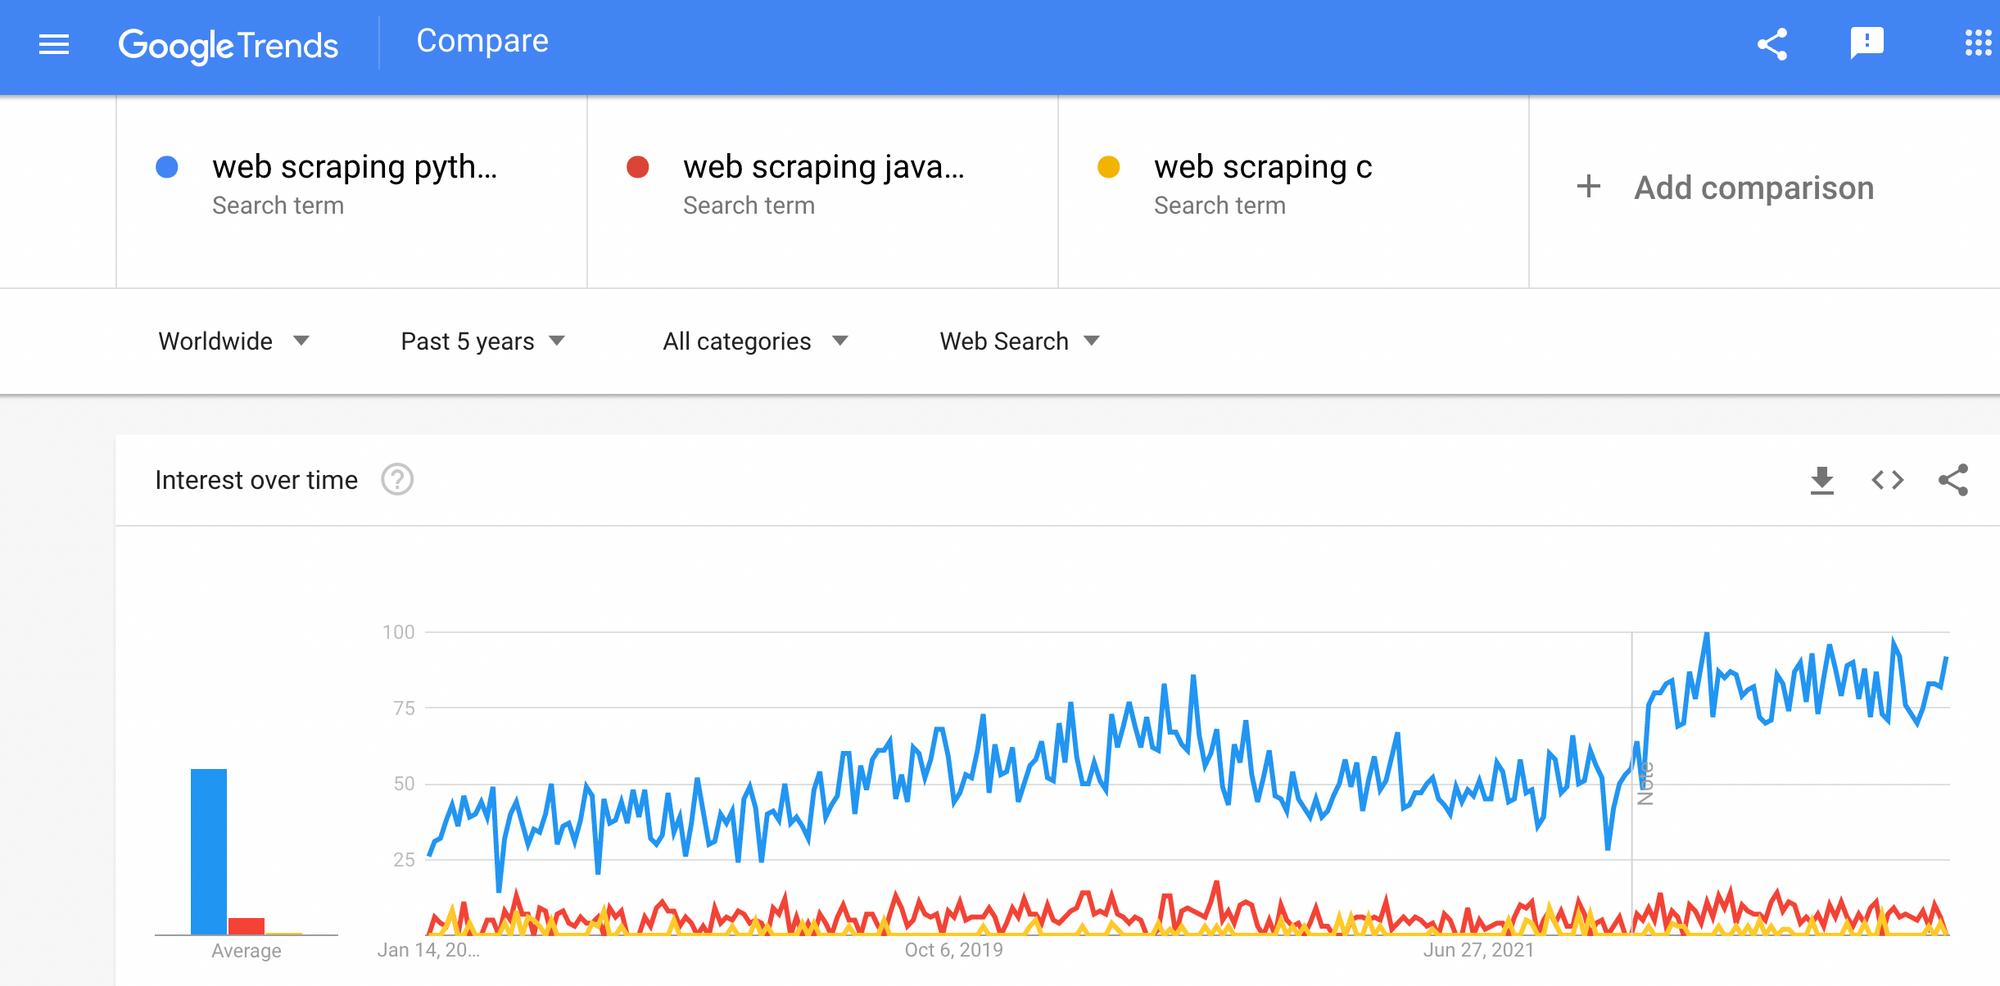 Data for web scraping + language for Google Trends in 2022